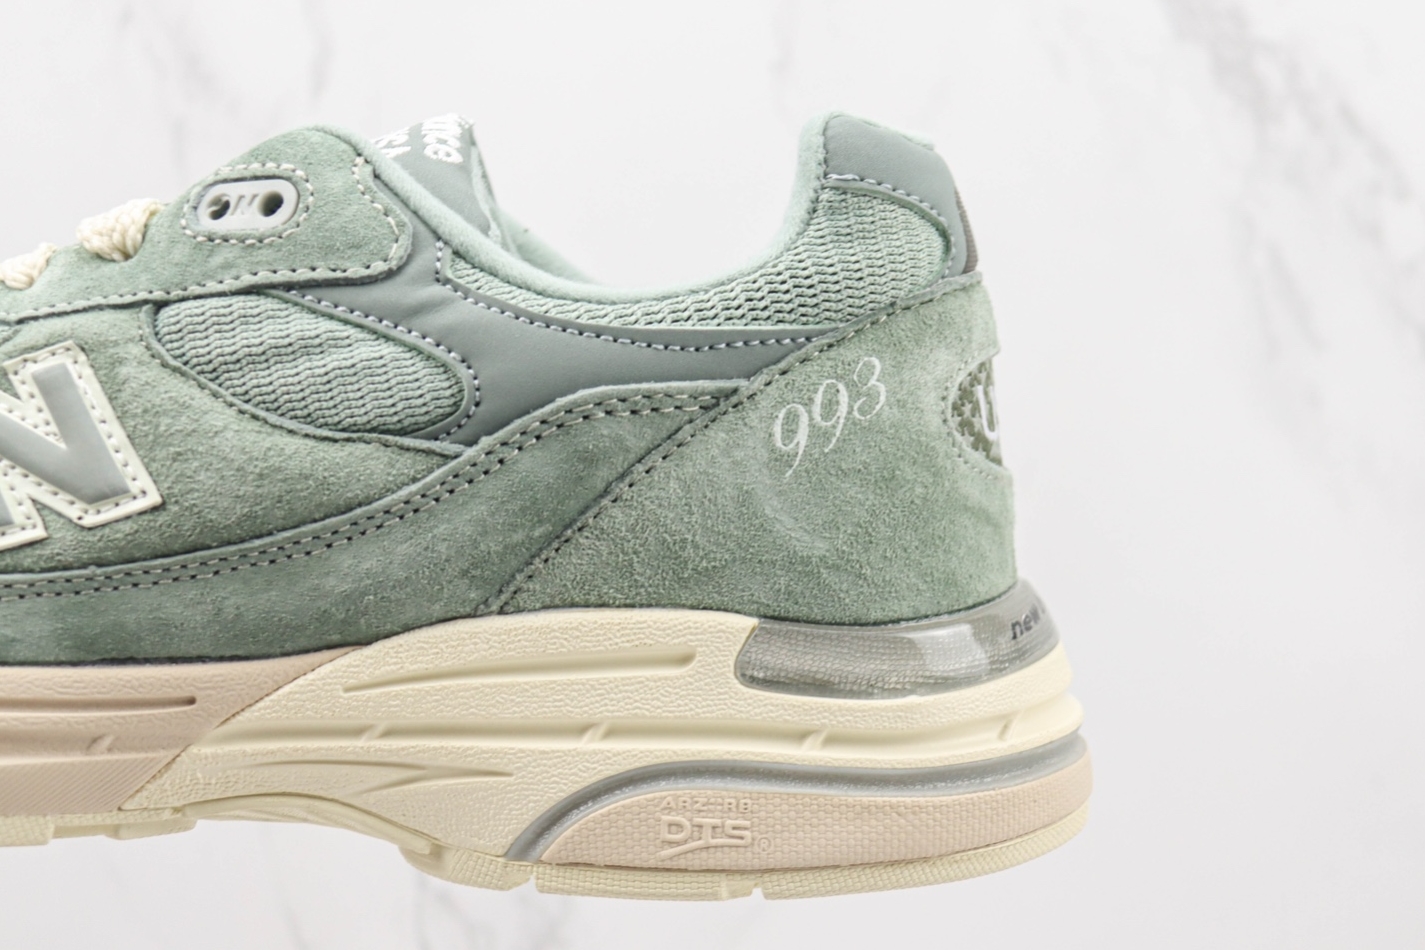 New Balance 993 Made in USA x Kith 'Pistachio' MR993KH1 - Premium Quality Athletic Sneaker